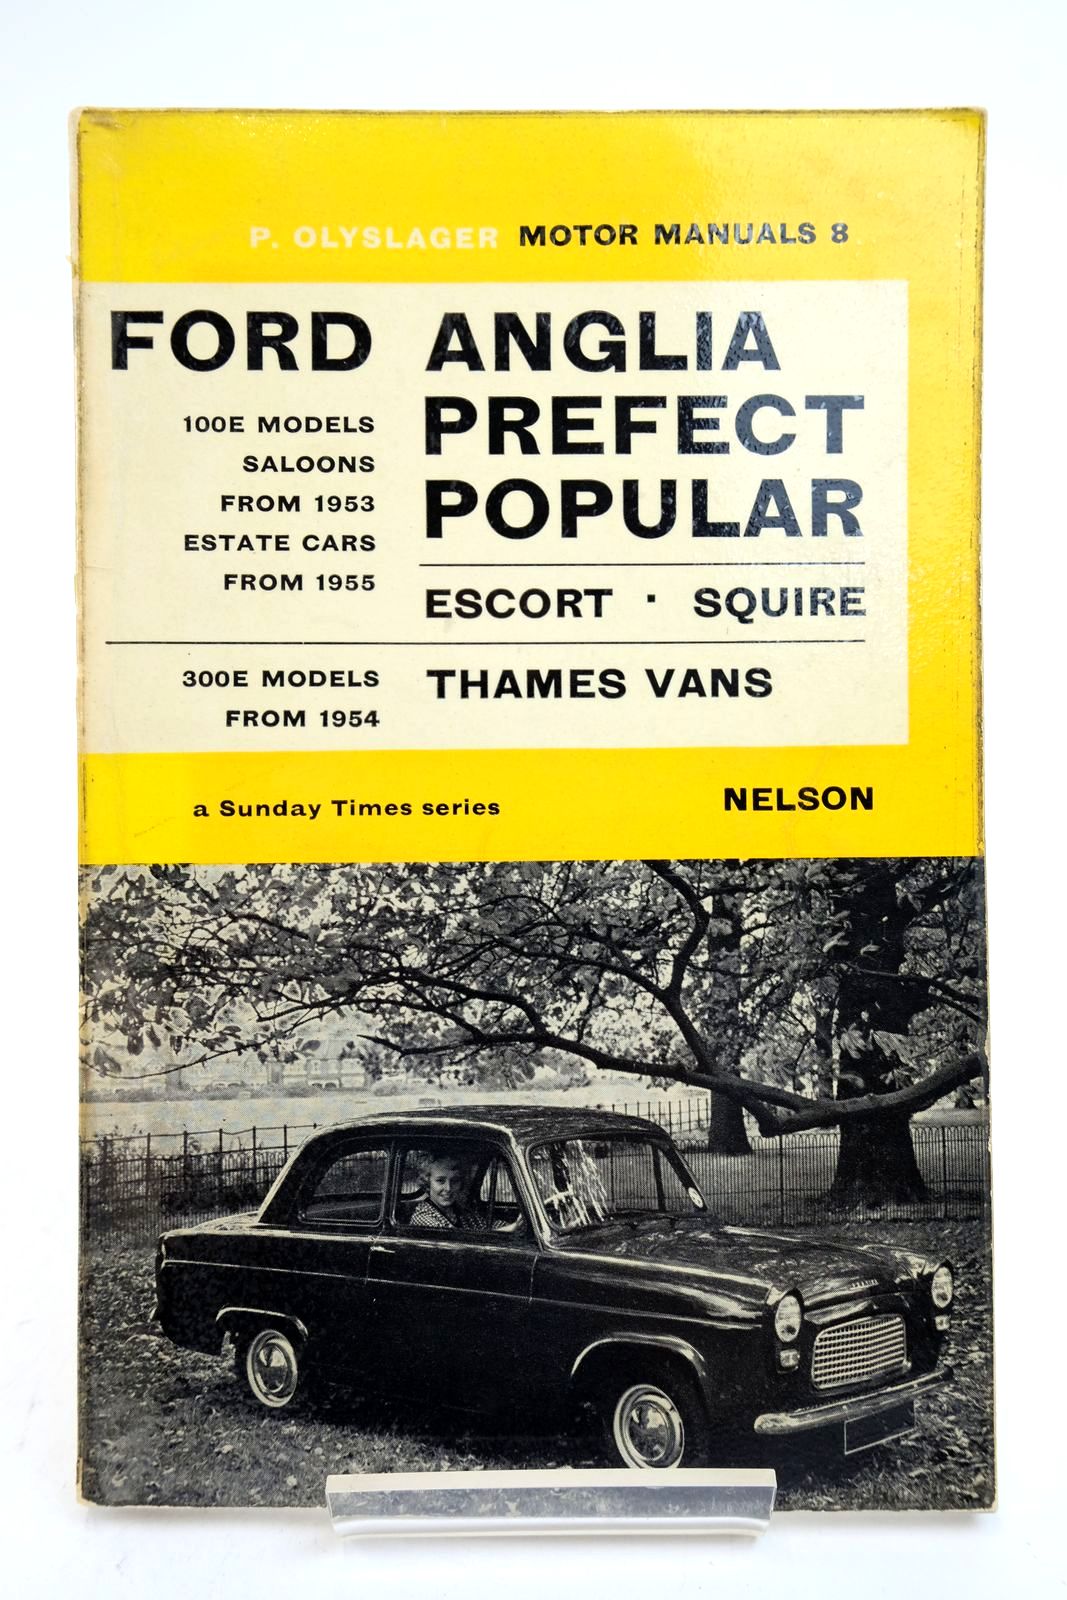 Photo of HANDBOOK FOR THE FORD ANGLIA PREFECT POPULAR FROM 1953 written by Olyslager, Piet published by Thomas Nelson and Sons Ltd. (STOCK CODE: 2139548)  for sale by Stella & Rose's Books